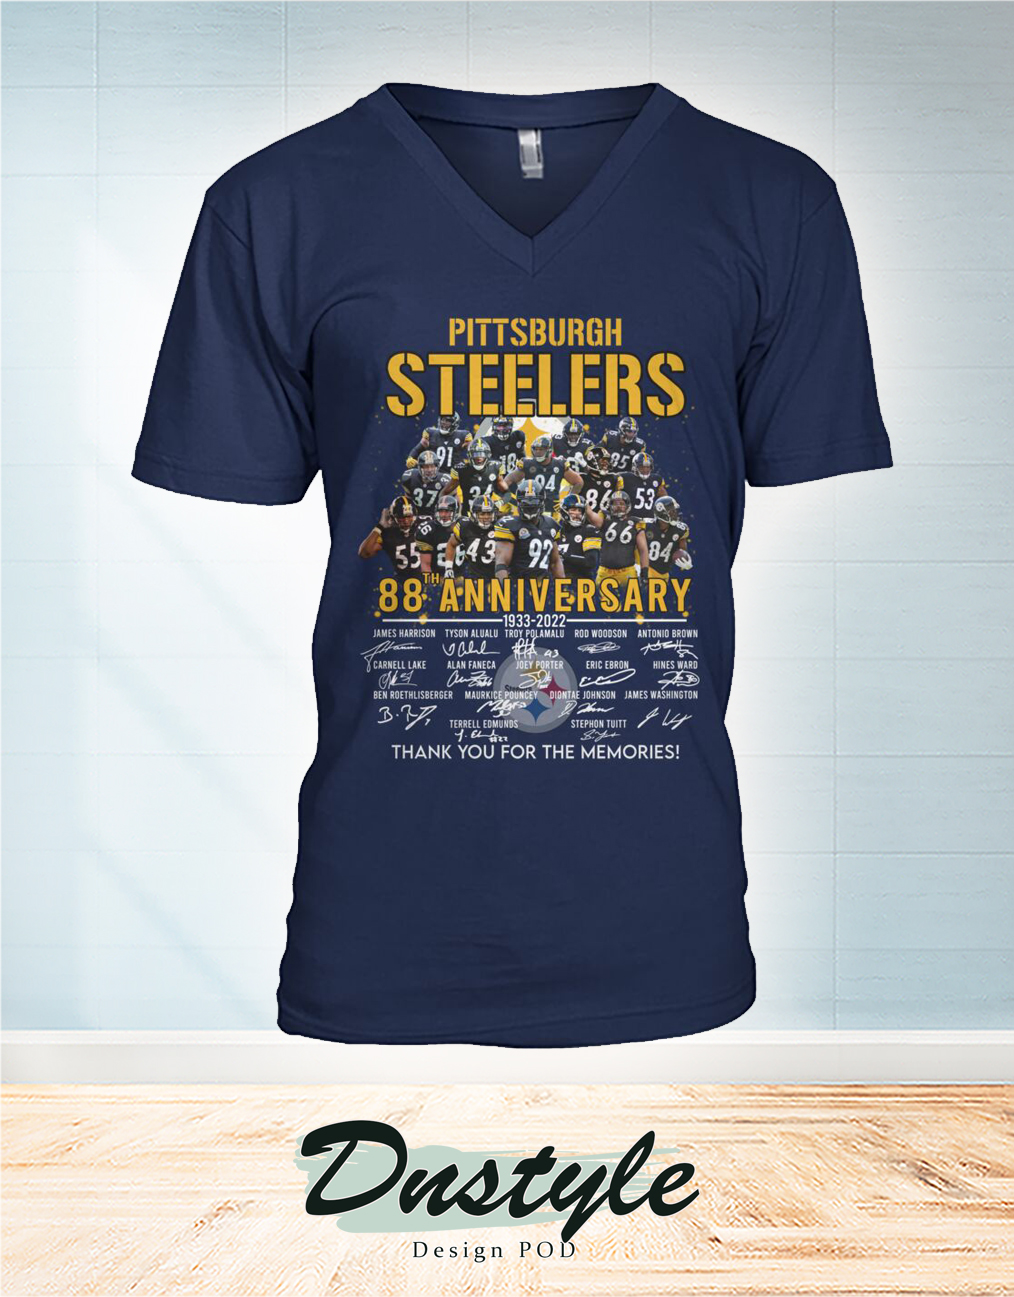 Pittsburgh steelers 88 anniversary signature thank you for the memories shirt